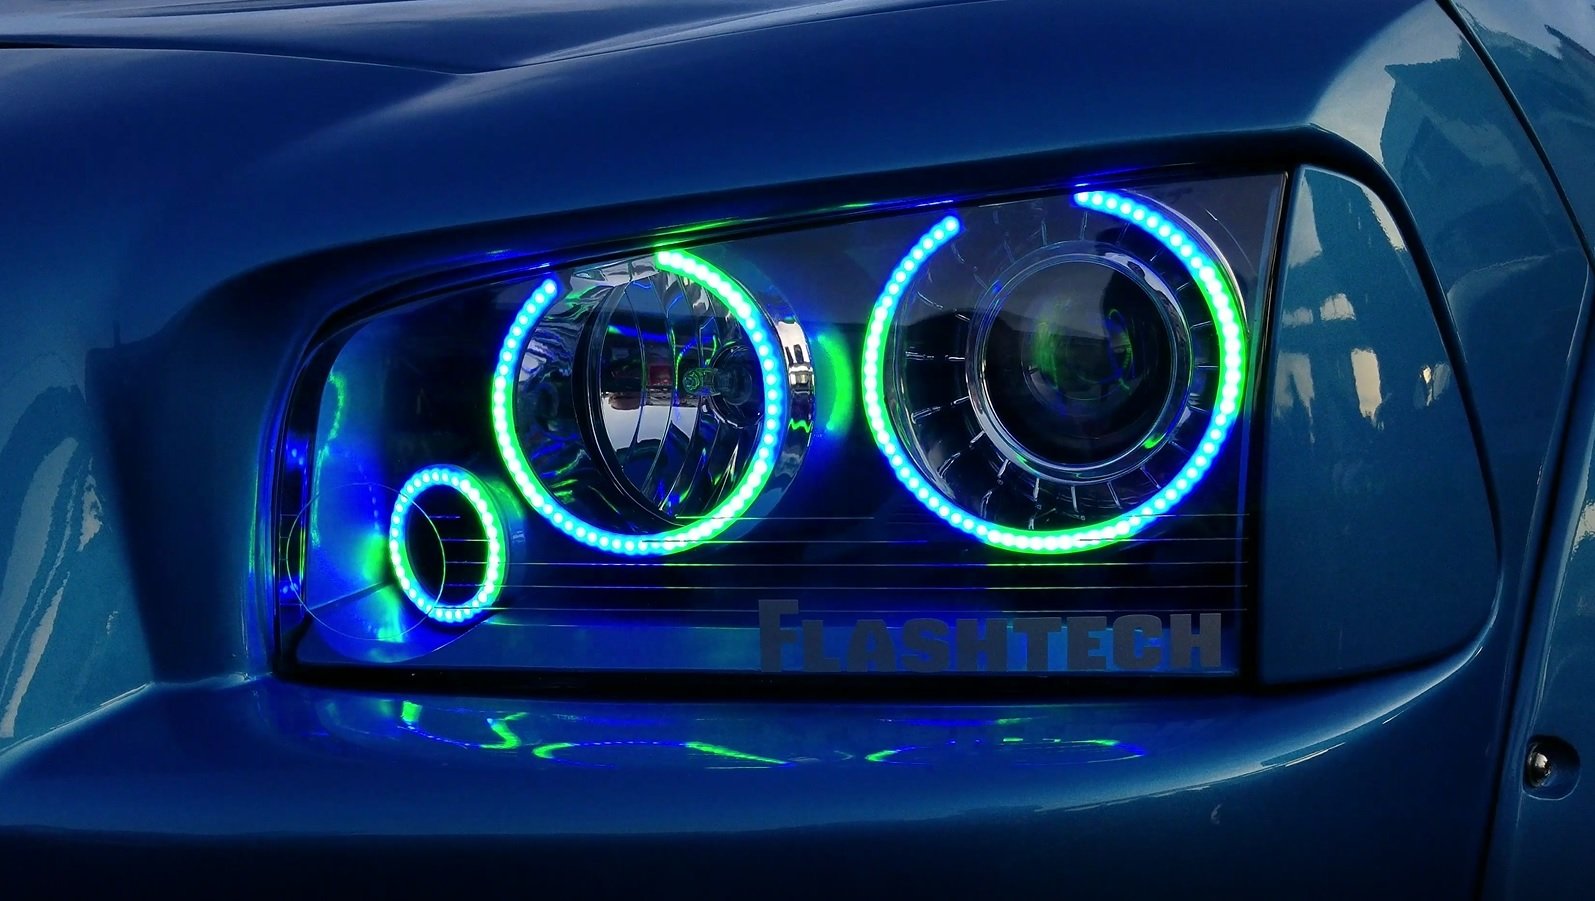 Toyota-4Runner-2003, 2004, 2005-LED-Halo-Headlights-ColorChase-No Remote-TO-4R0305-CCH